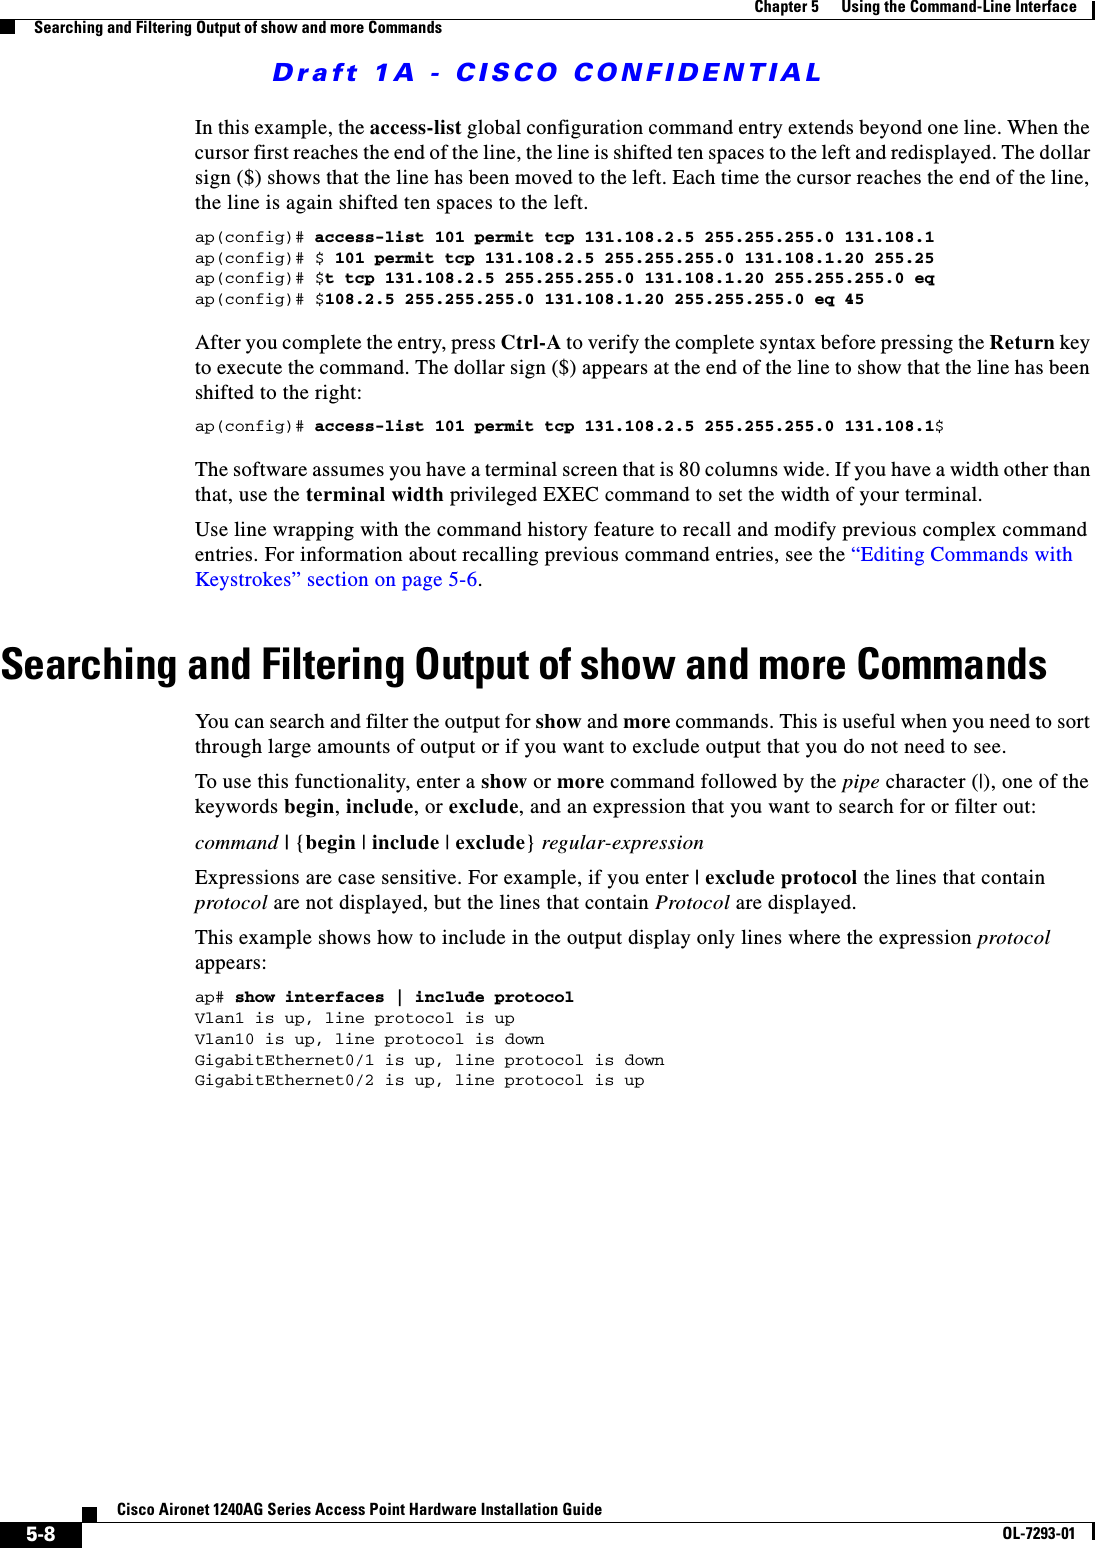 Draft 1A - CISCO CONFIDENTIAL5-8Cisco Aironet 1240AG Series Access Point Hardware Installation GuideOL-7293-01Chapter 5      Using the Command-Line InterfaceSearching and Filtering Output of show and more CommandsIn this example, the access-list global configuration command entry extends beyond one line. When the cursor first reaches the end of the line, the line is shifted ten spaces to the left and redisplayed. The dollar sign ($) shows that the line has been moved to the left. Each time the cursor reaches the end of the line, the line is again shifted ten spaces to the left. ap(config)# access-list 101 permit tcp 131.108.2.5 255.255.255.0 131.108.1ap(config)# $ 101 permit tcp 131.108.2.5 255.255.255.0 131.108.1.20 255.25ap(config)# $t tcp 131.108.2.5 255.255.255.0 131.108.1.20 255.255.255.0 eqap(config)# $108.2.5 255.255.255.0 131.108.1.20 255.255.255.0 eq 45 After you complete the entry, press Ctrl-A to verify the complete syntax before pressing the Return key to execute the command. The dollar sign ($) appears at the end of the line to show that the line has been shifted to the right:ap(config)# access-list 101 permit tcp 131.108.2.5 255.255.255.0 131.108.1$The software assumes you have a terminal screen that is 80 columns wide. If you have a width other than that, use the terminal width privileged EXEC command to set the width of your terminal.Use line wrapping with the command history feature to recall and modify previous complex command entries. For information about recalling previous command entries, see the “Editing Commands with Keystrokes” section on page 5-6.Searching and Filtering Output of show and more CommandsYou can search and filter the output for show and more commands. This is useful when you need to sort through large amounts of output or if you want to exclude output that you do not need to see.To use this functionality, enter a show or more command followed by the pipe character (|), one of the keywords begin, include, or exclude, and an expression that you want to search for or filter out:command | {begin | include | exclude} regular-expressionExpressions are case sensitive. For example, if you enter | exclude protocol the lines that contain protocol are not displayed, but the lines that contain Protocol are displayed.This example shows how to include in the output display only lines where the expression protocol appears:ap# show interfaces | include protocolVlan1 is up, line protocol is upVlan10 is up, line protocol is downGigabitEthernet0/1 is up, line protocol is downGigabitEthernet0/2 is up, line protocol is up 